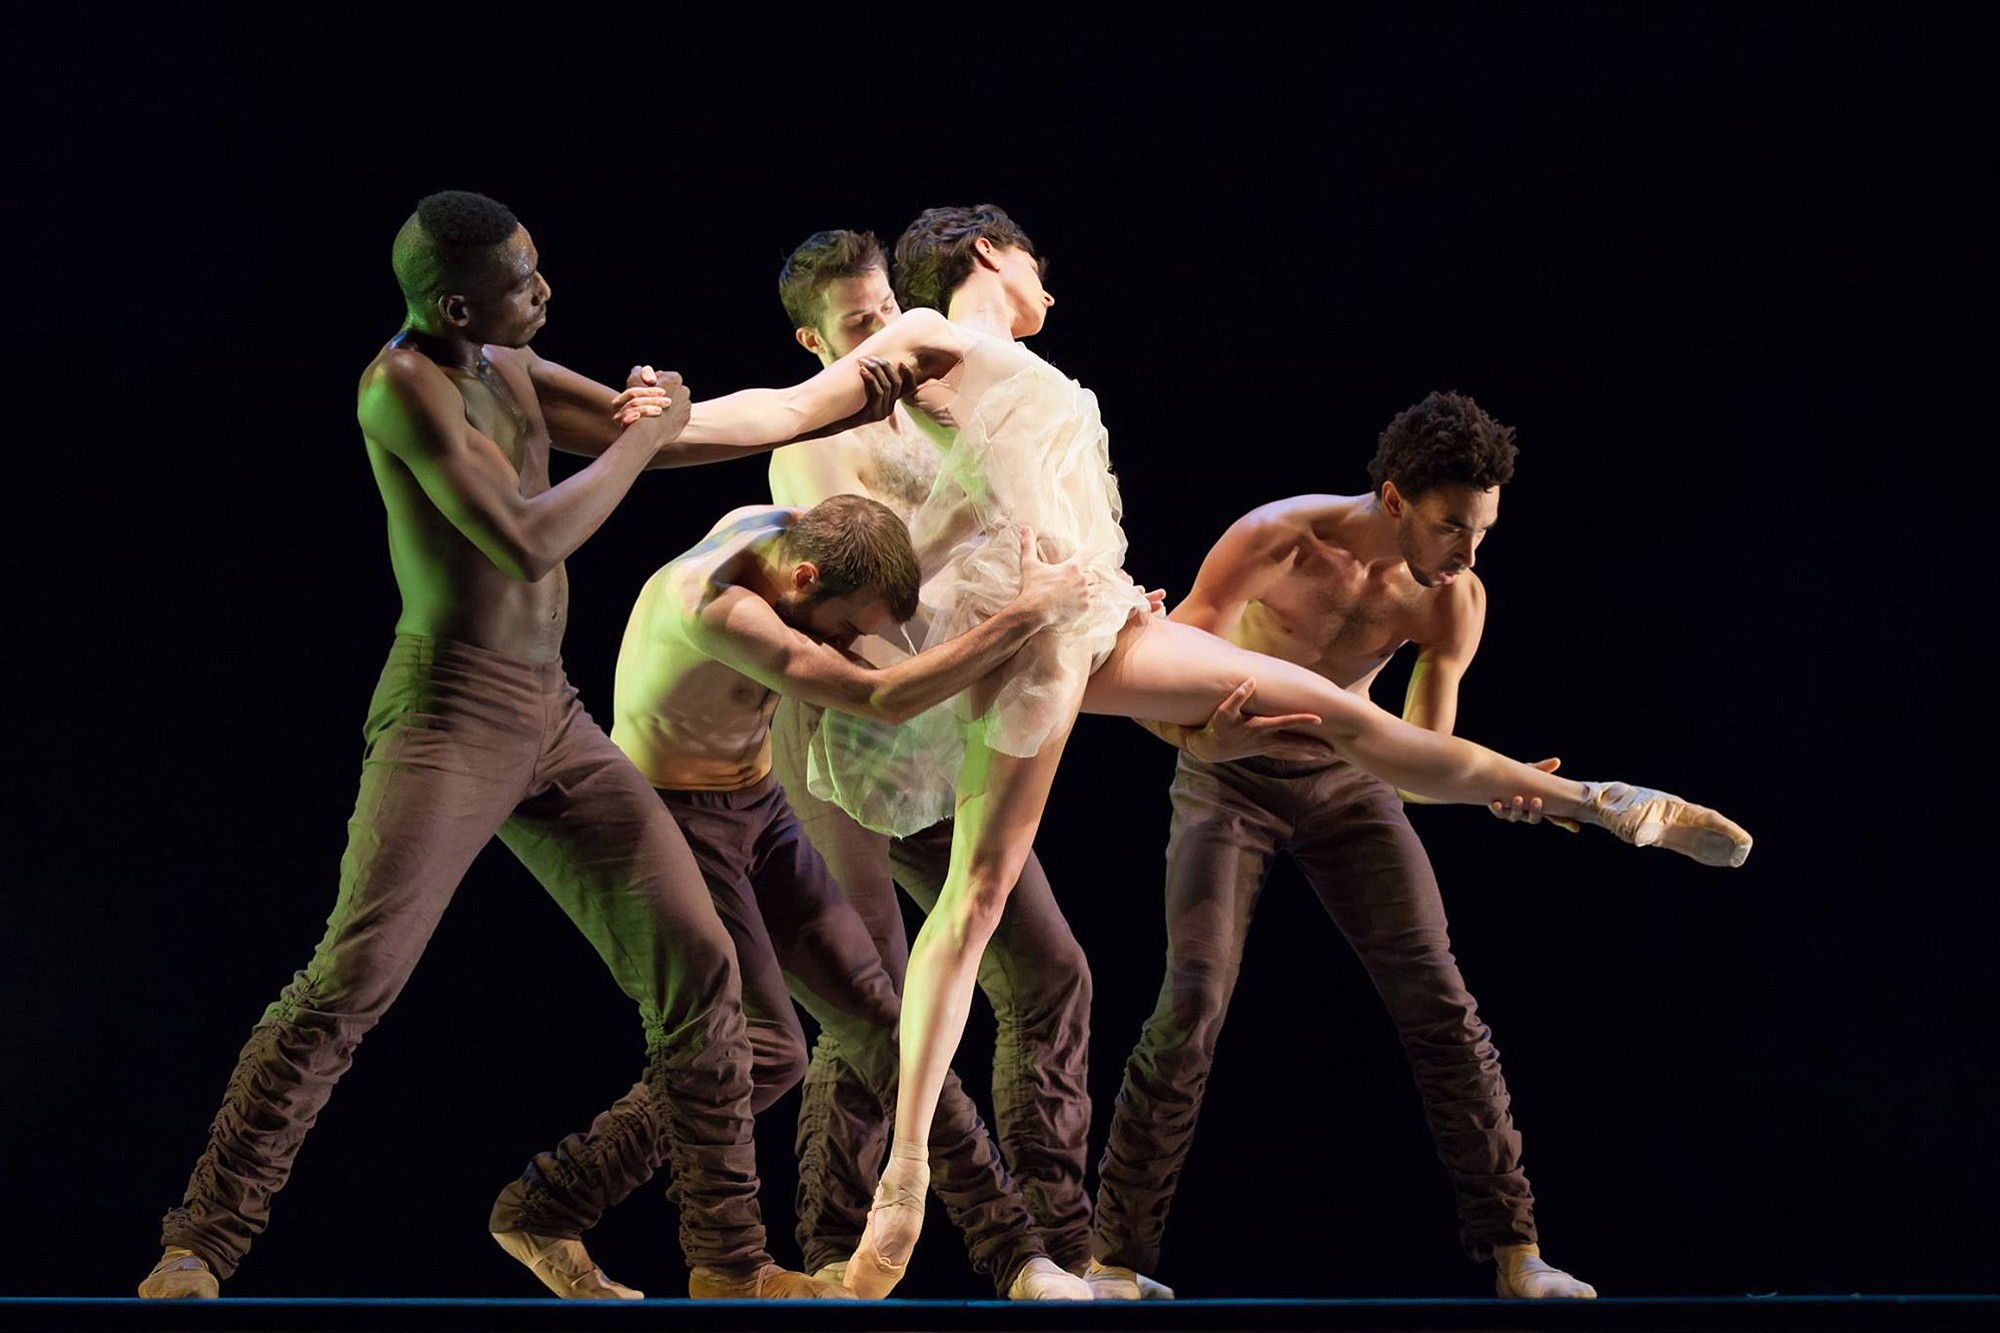 Alonzo King Lines Ballet will perform Feb. 26-28 as part of White Bird Dance at the Newmark Theatre in Portland.